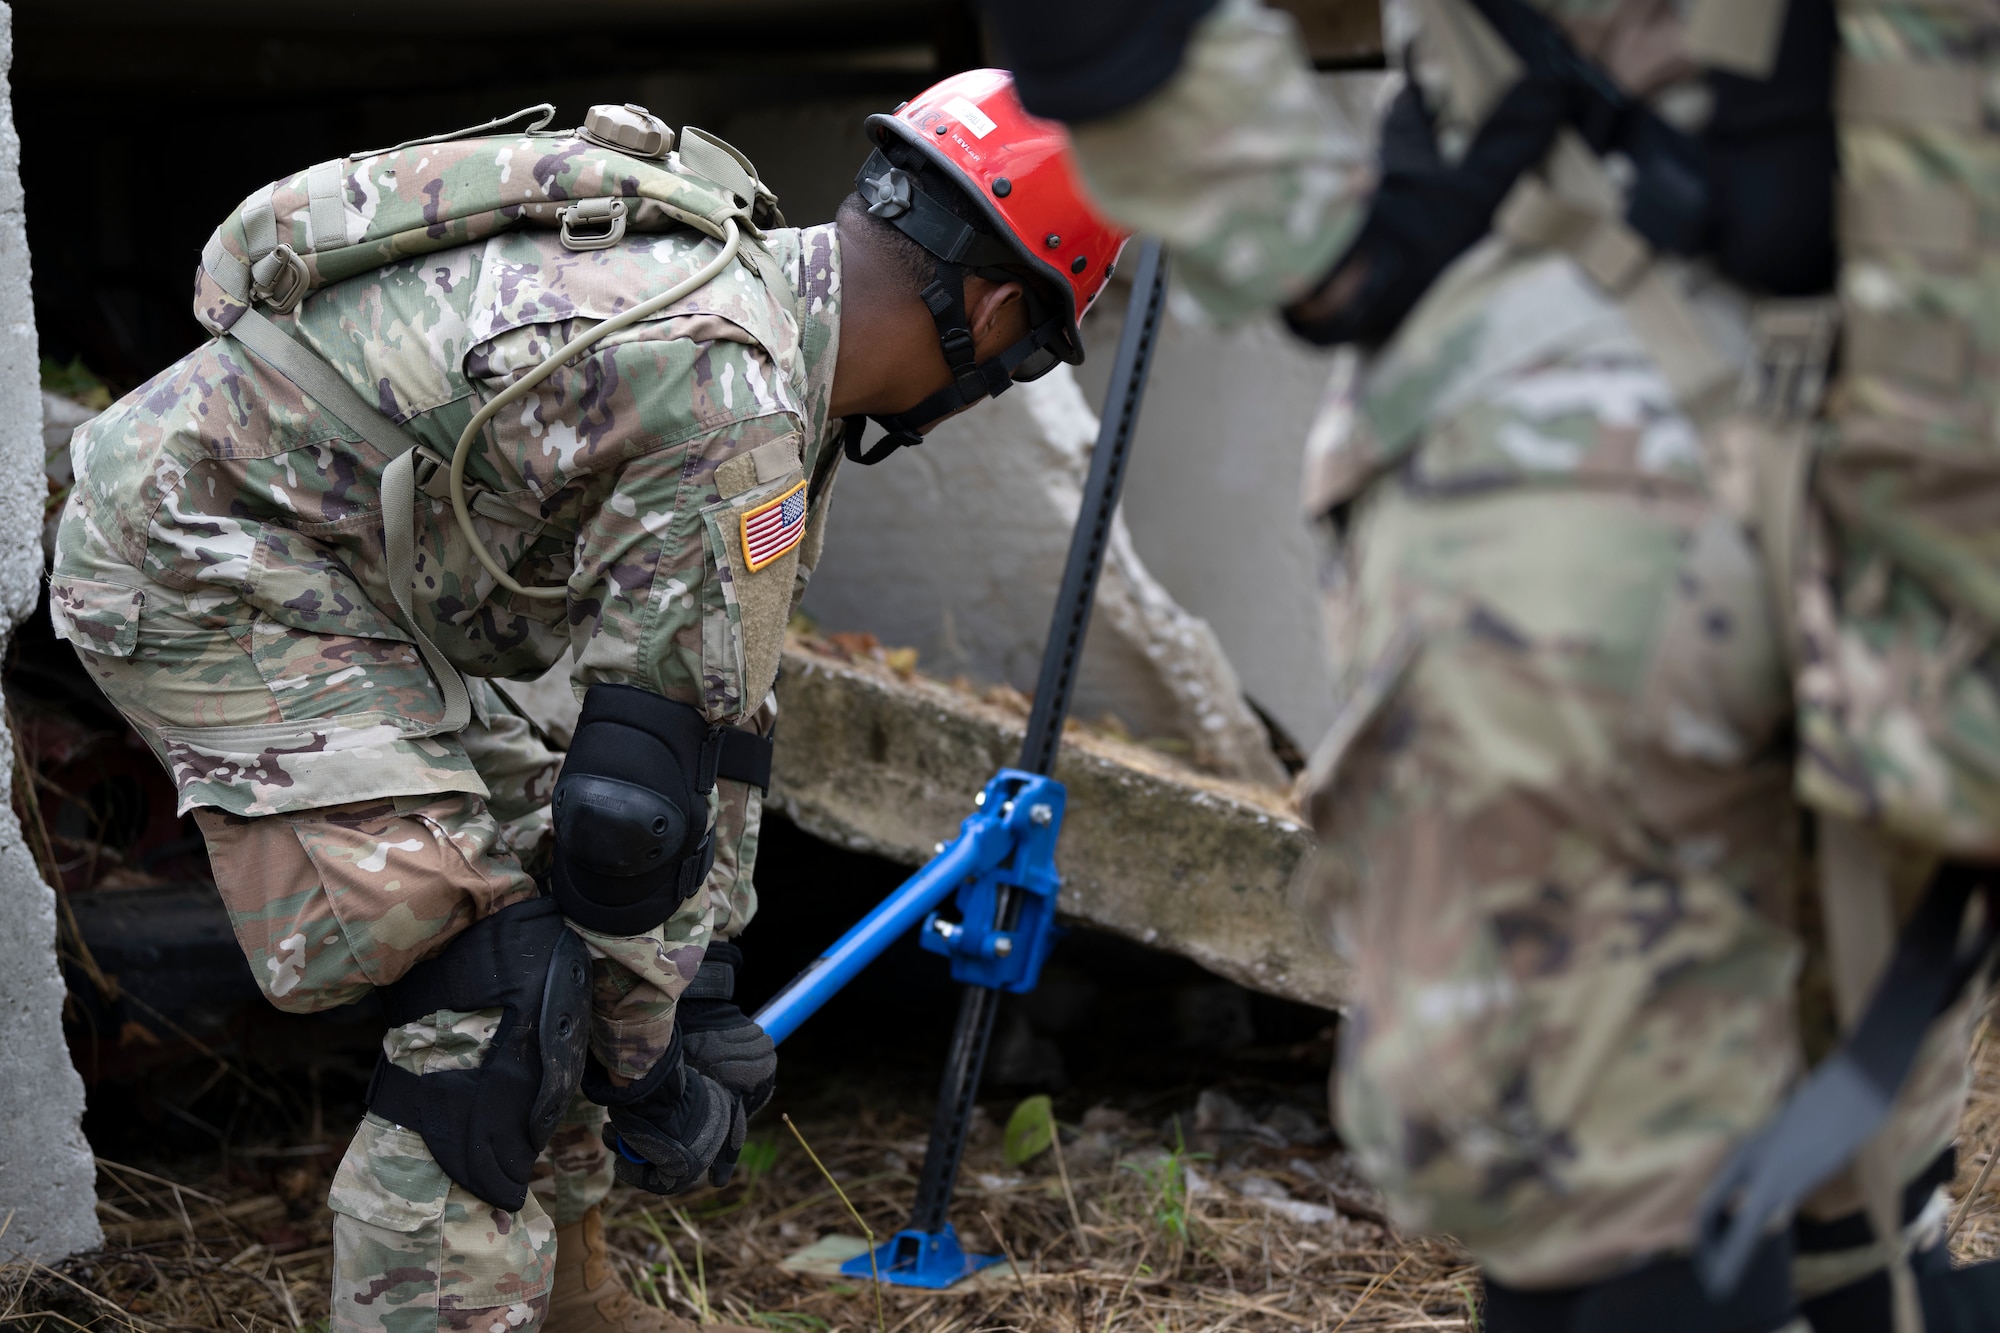 A U.S. Soldier assigned to the Puerto Rico Army National Guard lifts heavy debris during a collective training exercise at Camp Santiago Joint Training Center, Salinas, Puerto Rico, Aug. 10, 2023. The exercise allowed service members assigned to the 156th Medical Group, 123rd Medical Group and the Puerto Rico Army National Guard to exchange knowledge and implement the National Guard CBRN Response Enterprise Information Management System, which assists with accelerating data collection from search and extraction teams in emergency events. (U.S. Air National Guard photo by Master Sgt. Rafael D. Rosa)